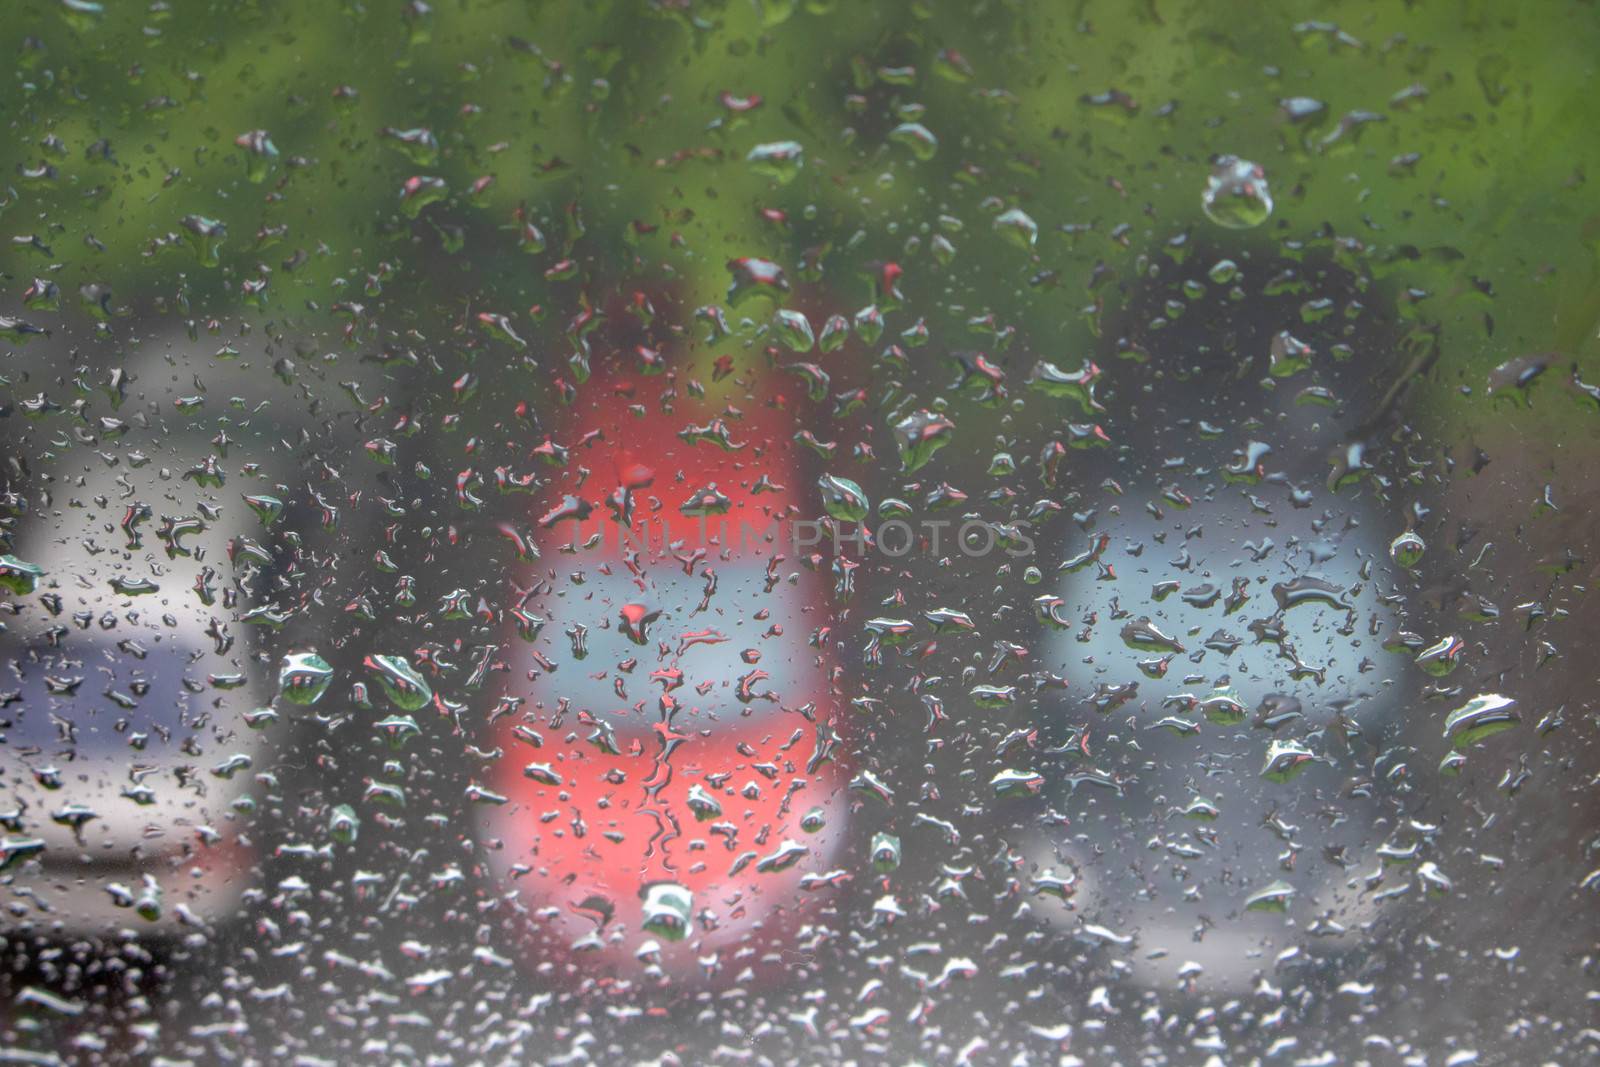 Raindrops on the window, with cars in the Parking lot in the background.